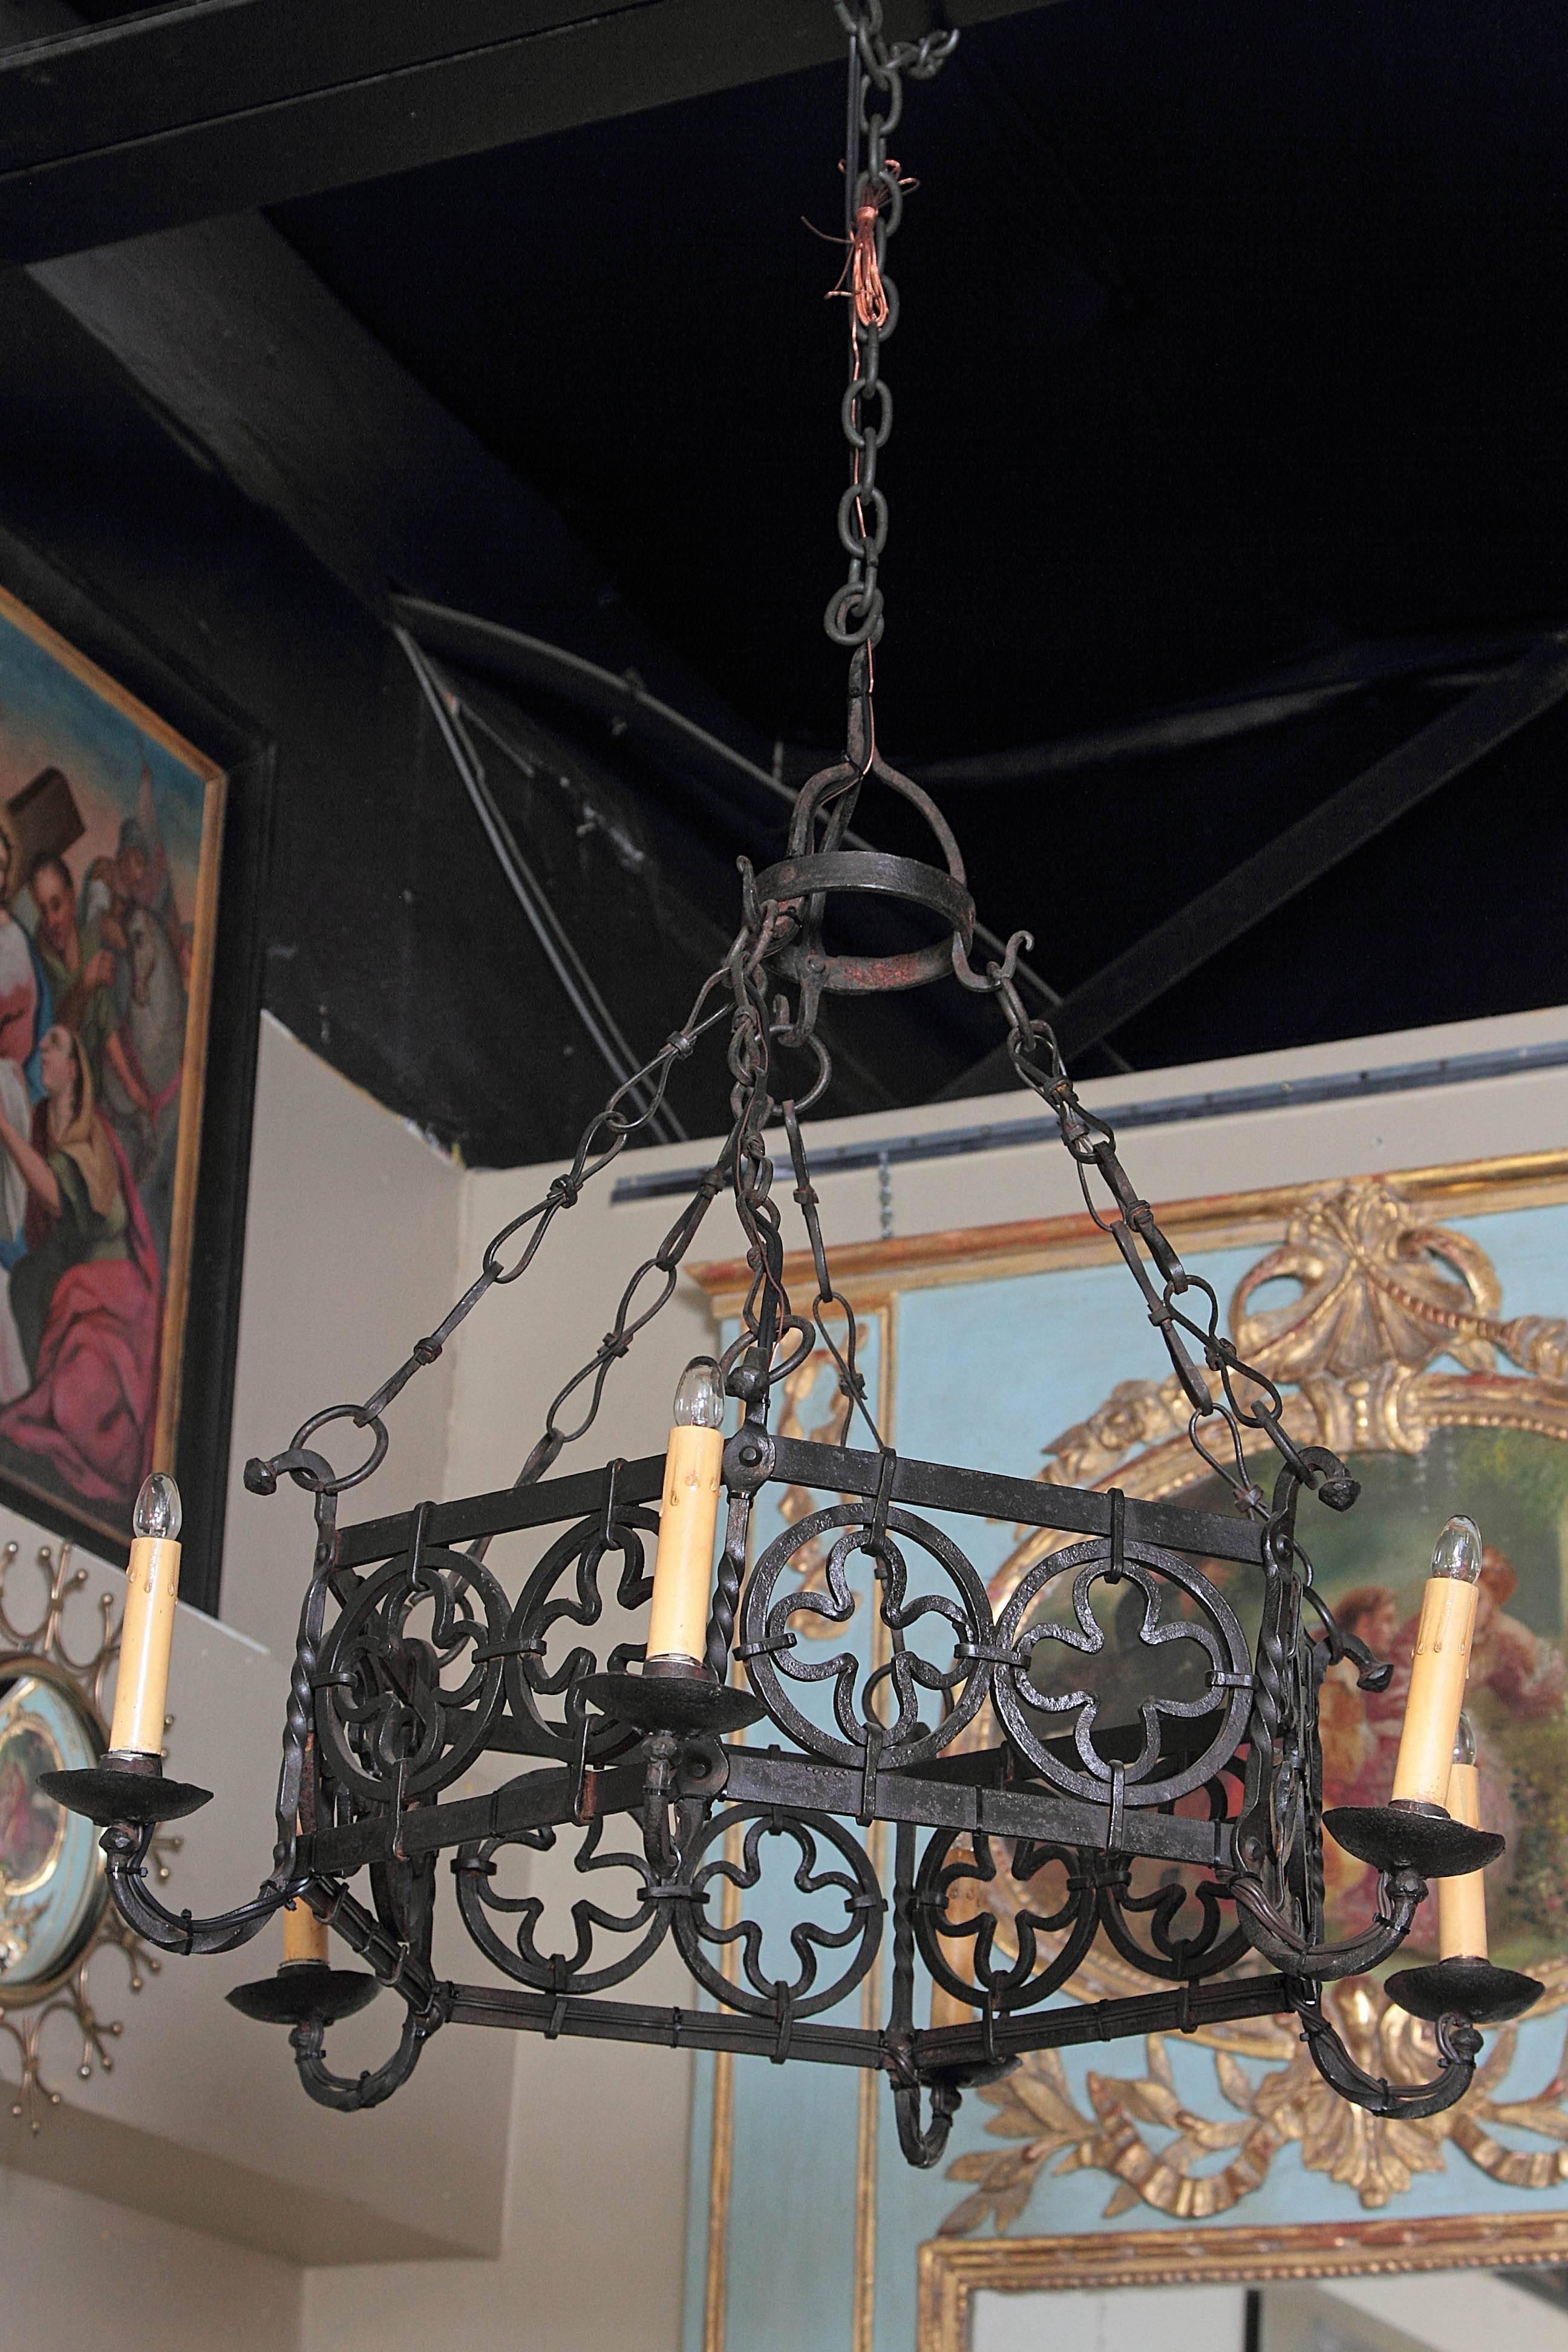 Add a rustic style to your home with this heavy, hand-forged chandelier from Southern France, circa 1870. Place the Gothic fixture with six sides and six lights in a living room or dining room for an antique, French countryside look. The piece has